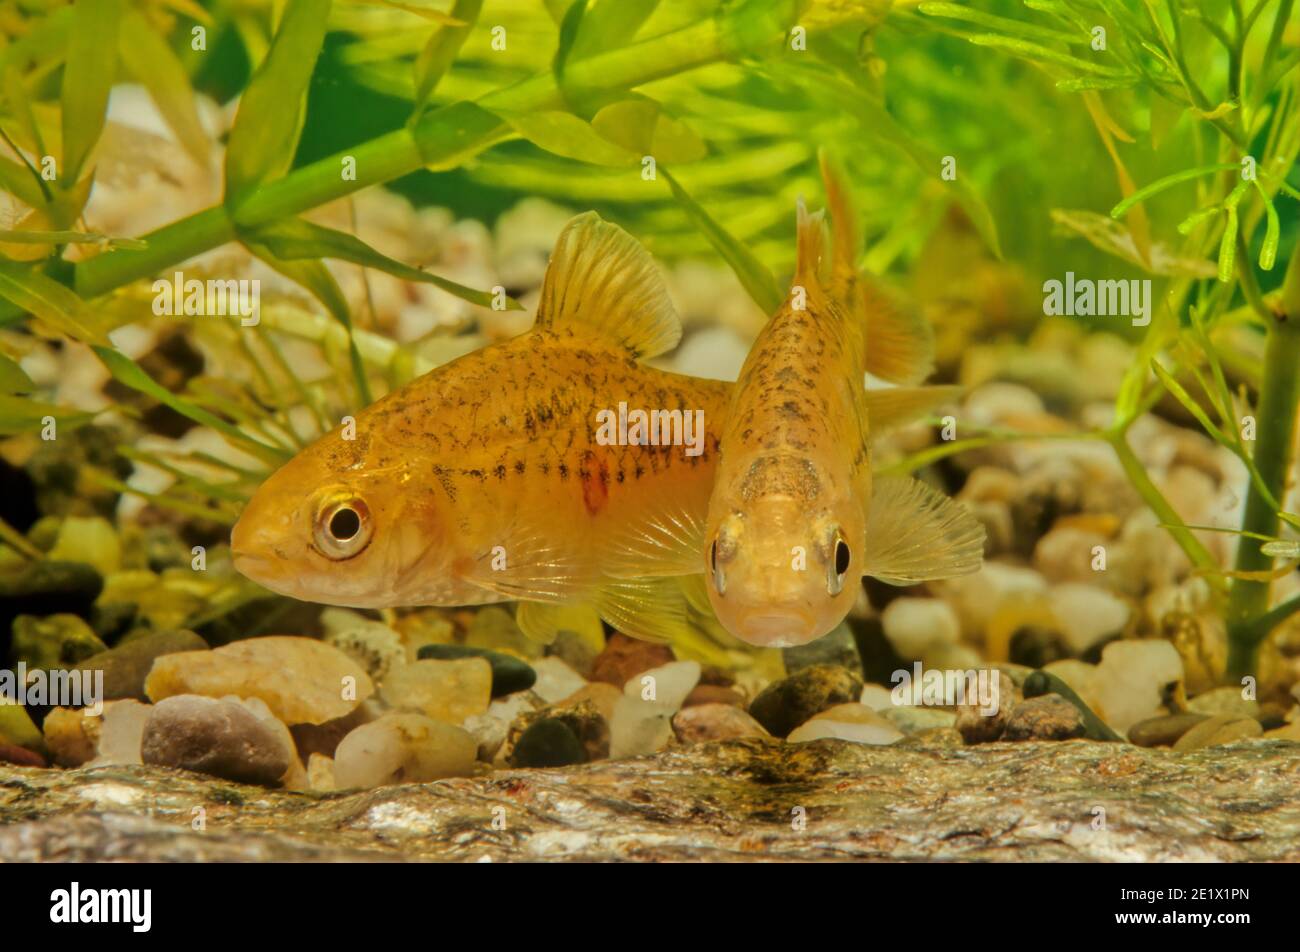 Barbodes semifasciolatus, the Chinese barb, is a species of cyprinid fish native to the Red River basin in southeast Asia where they occur in fresh wa Stock Photo